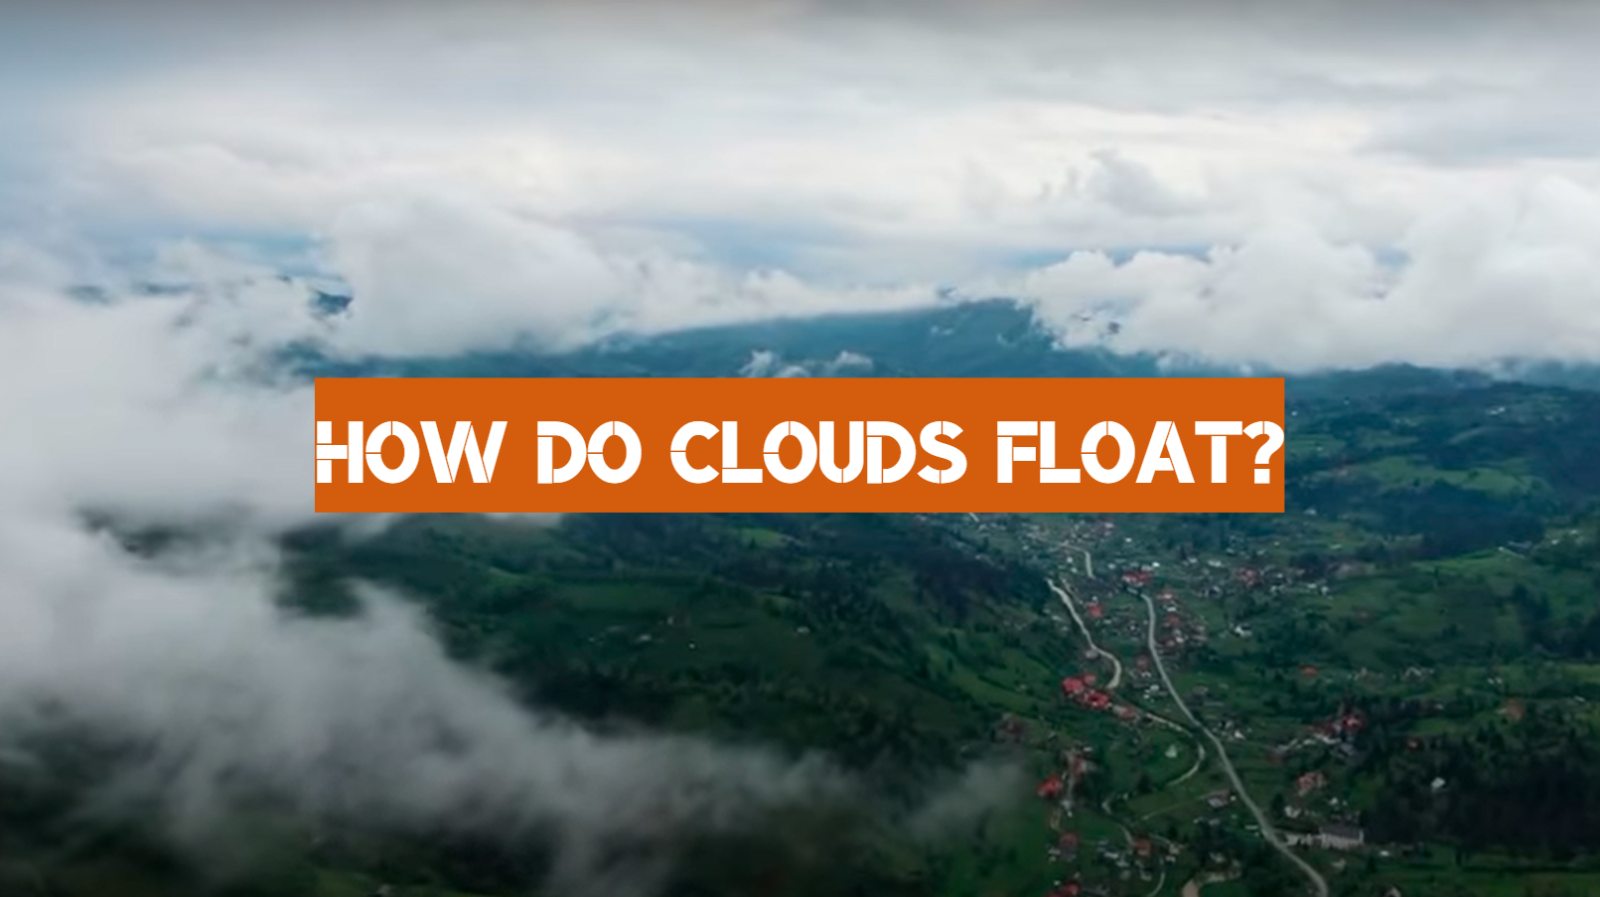 How Do Clouds Float?